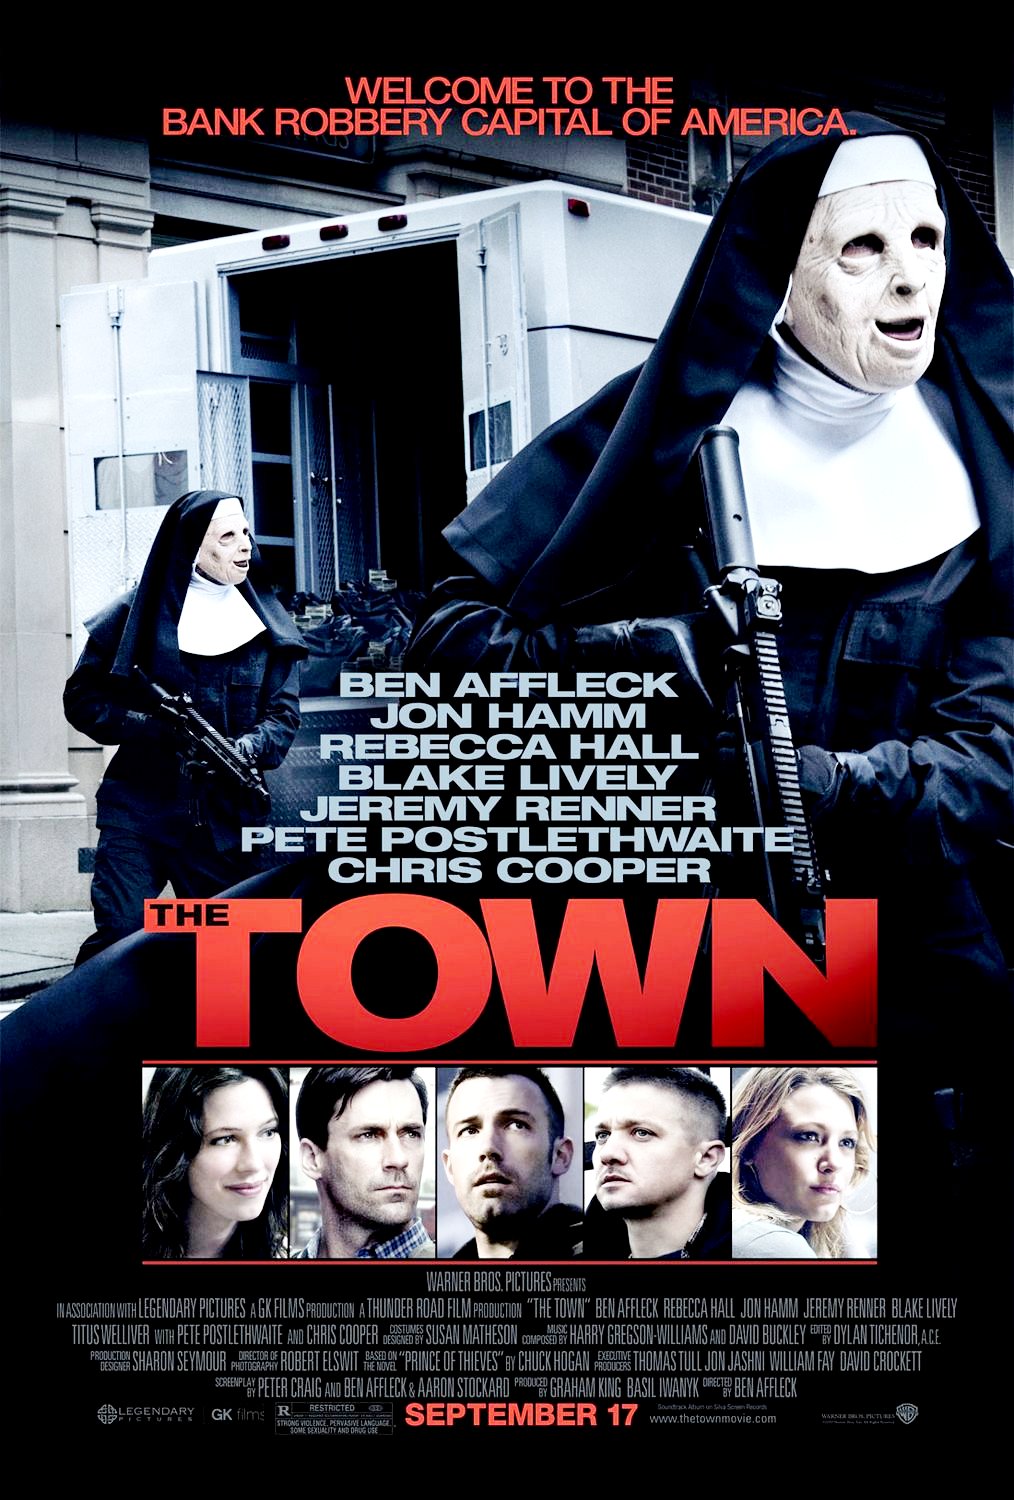 Poster of Warner Bros. Pictures' The Town (2010)